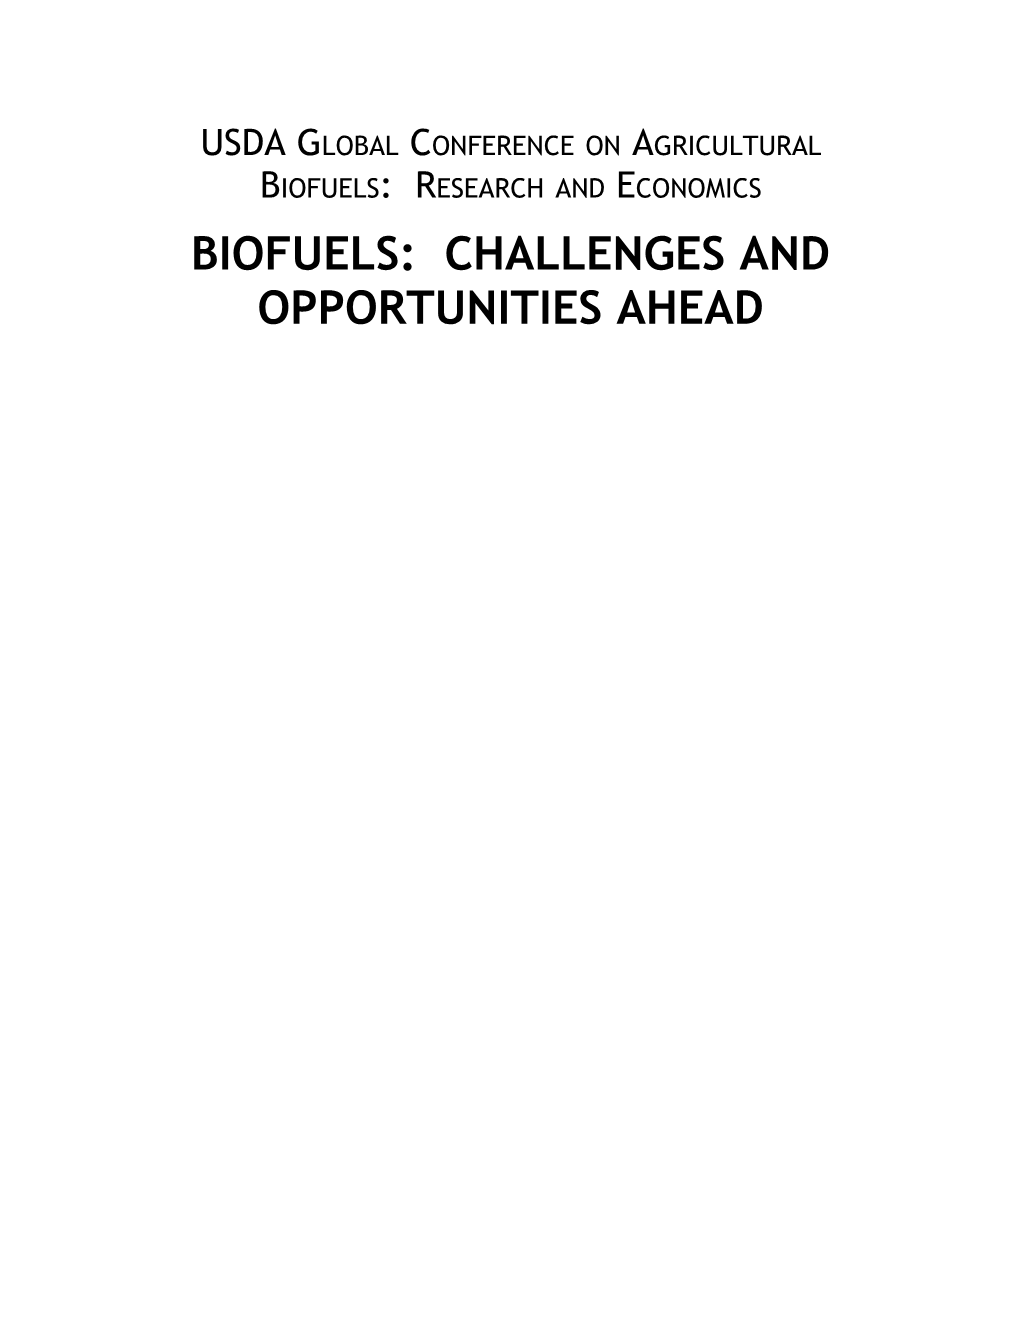 Biotechnology Options for Bioenergy Crops